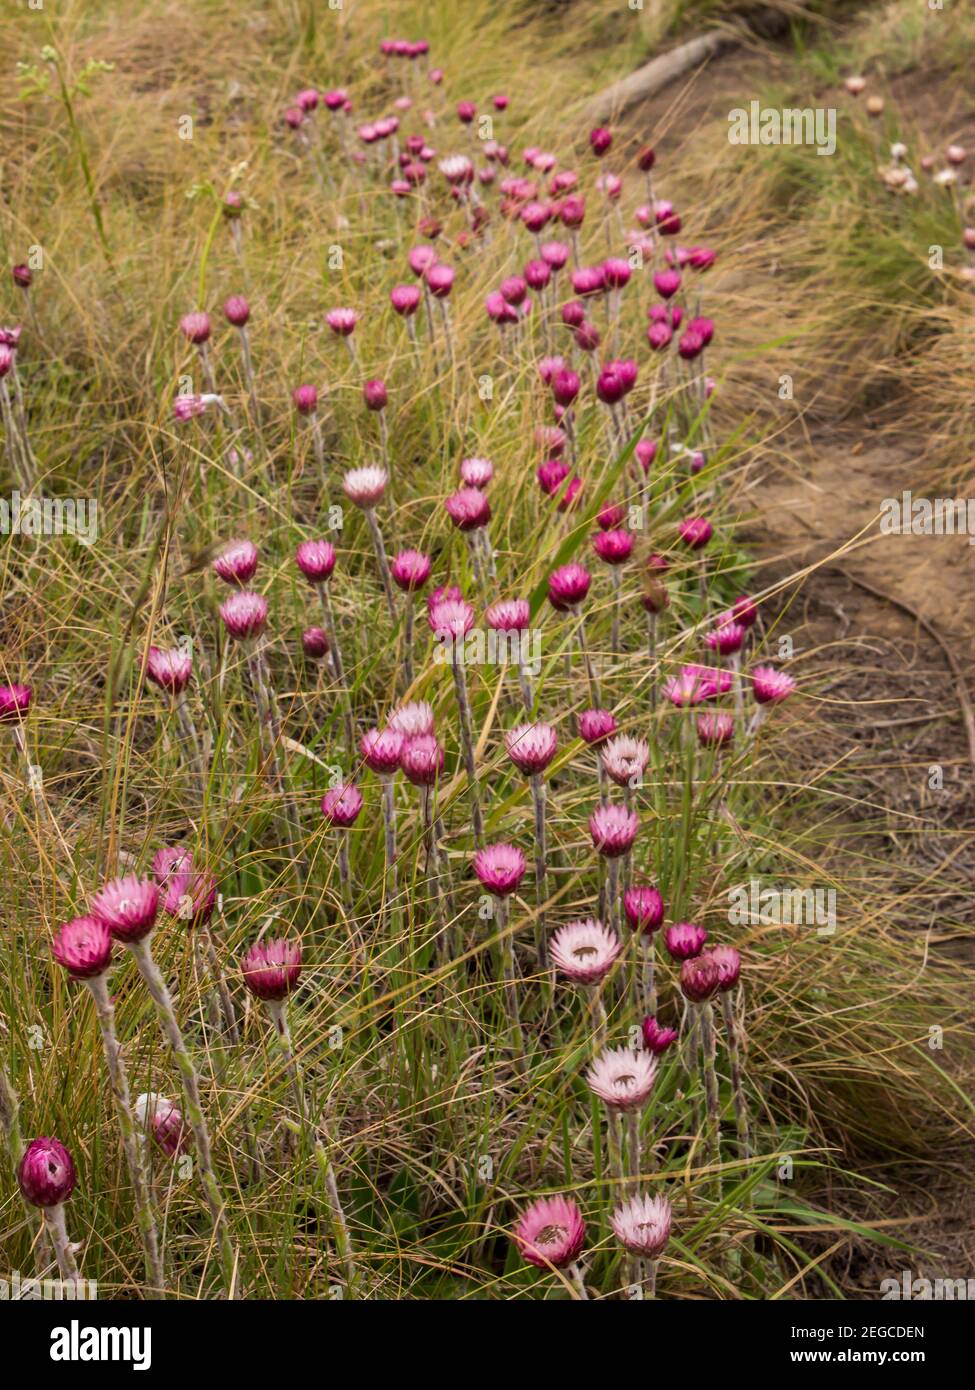 A mass of pink everlastings, Helichrysum Adenocarpum, in full bloom in the grassland next to a small hiking trail in the Central Drakensberg Mountains Stock Photo